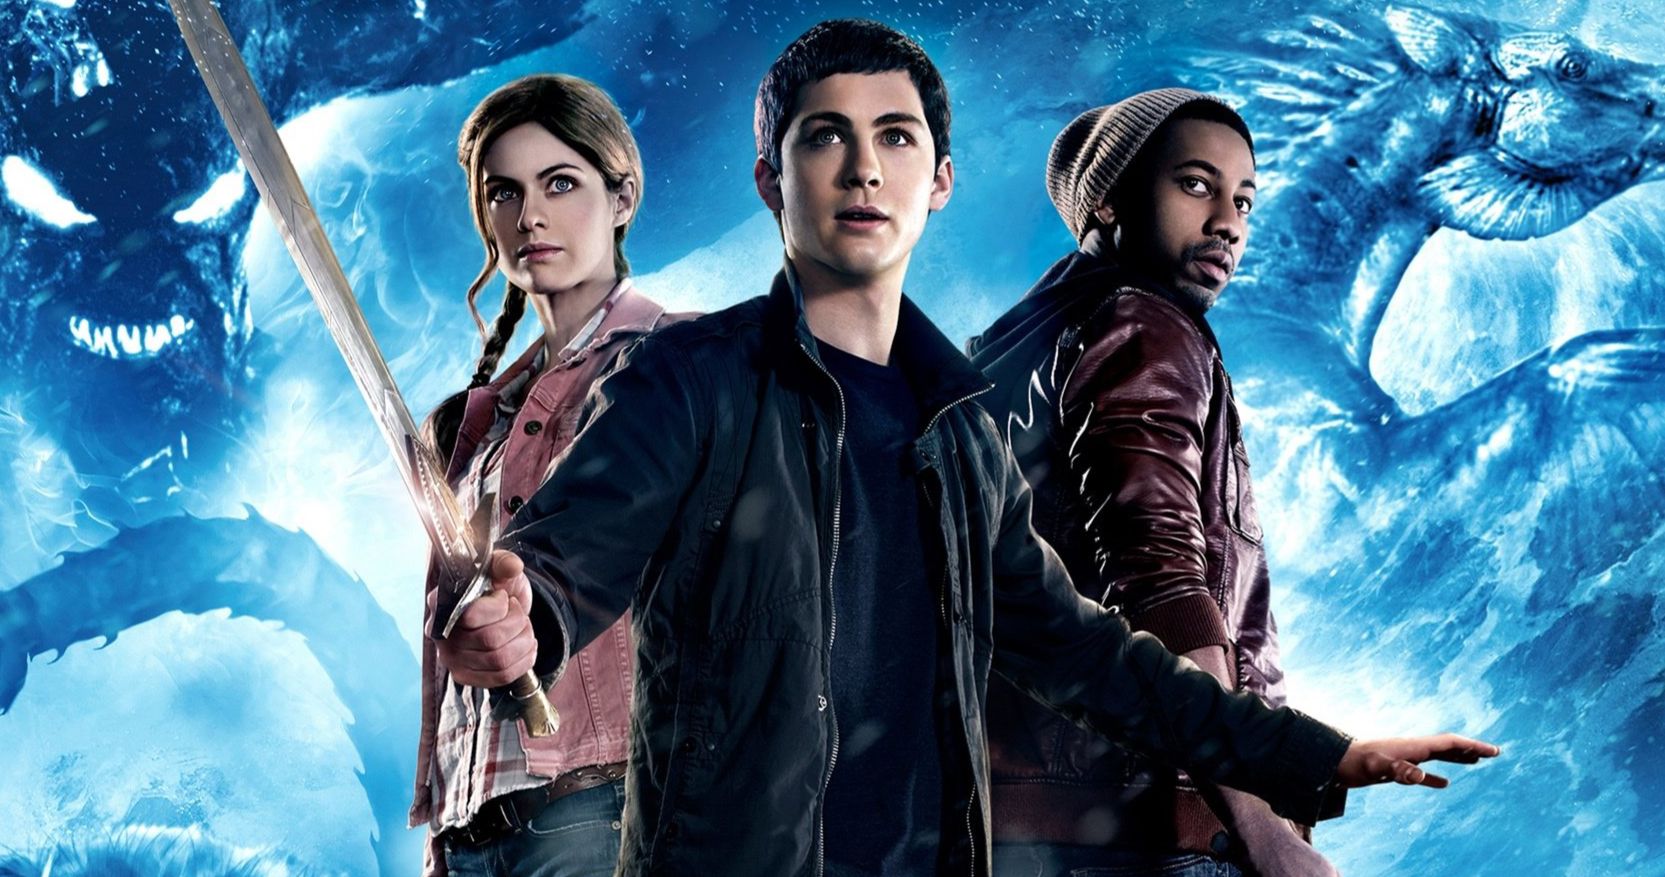 Percy Jackson Director Search Is On, Creator Assures Disney+ Series Is Moving Forward